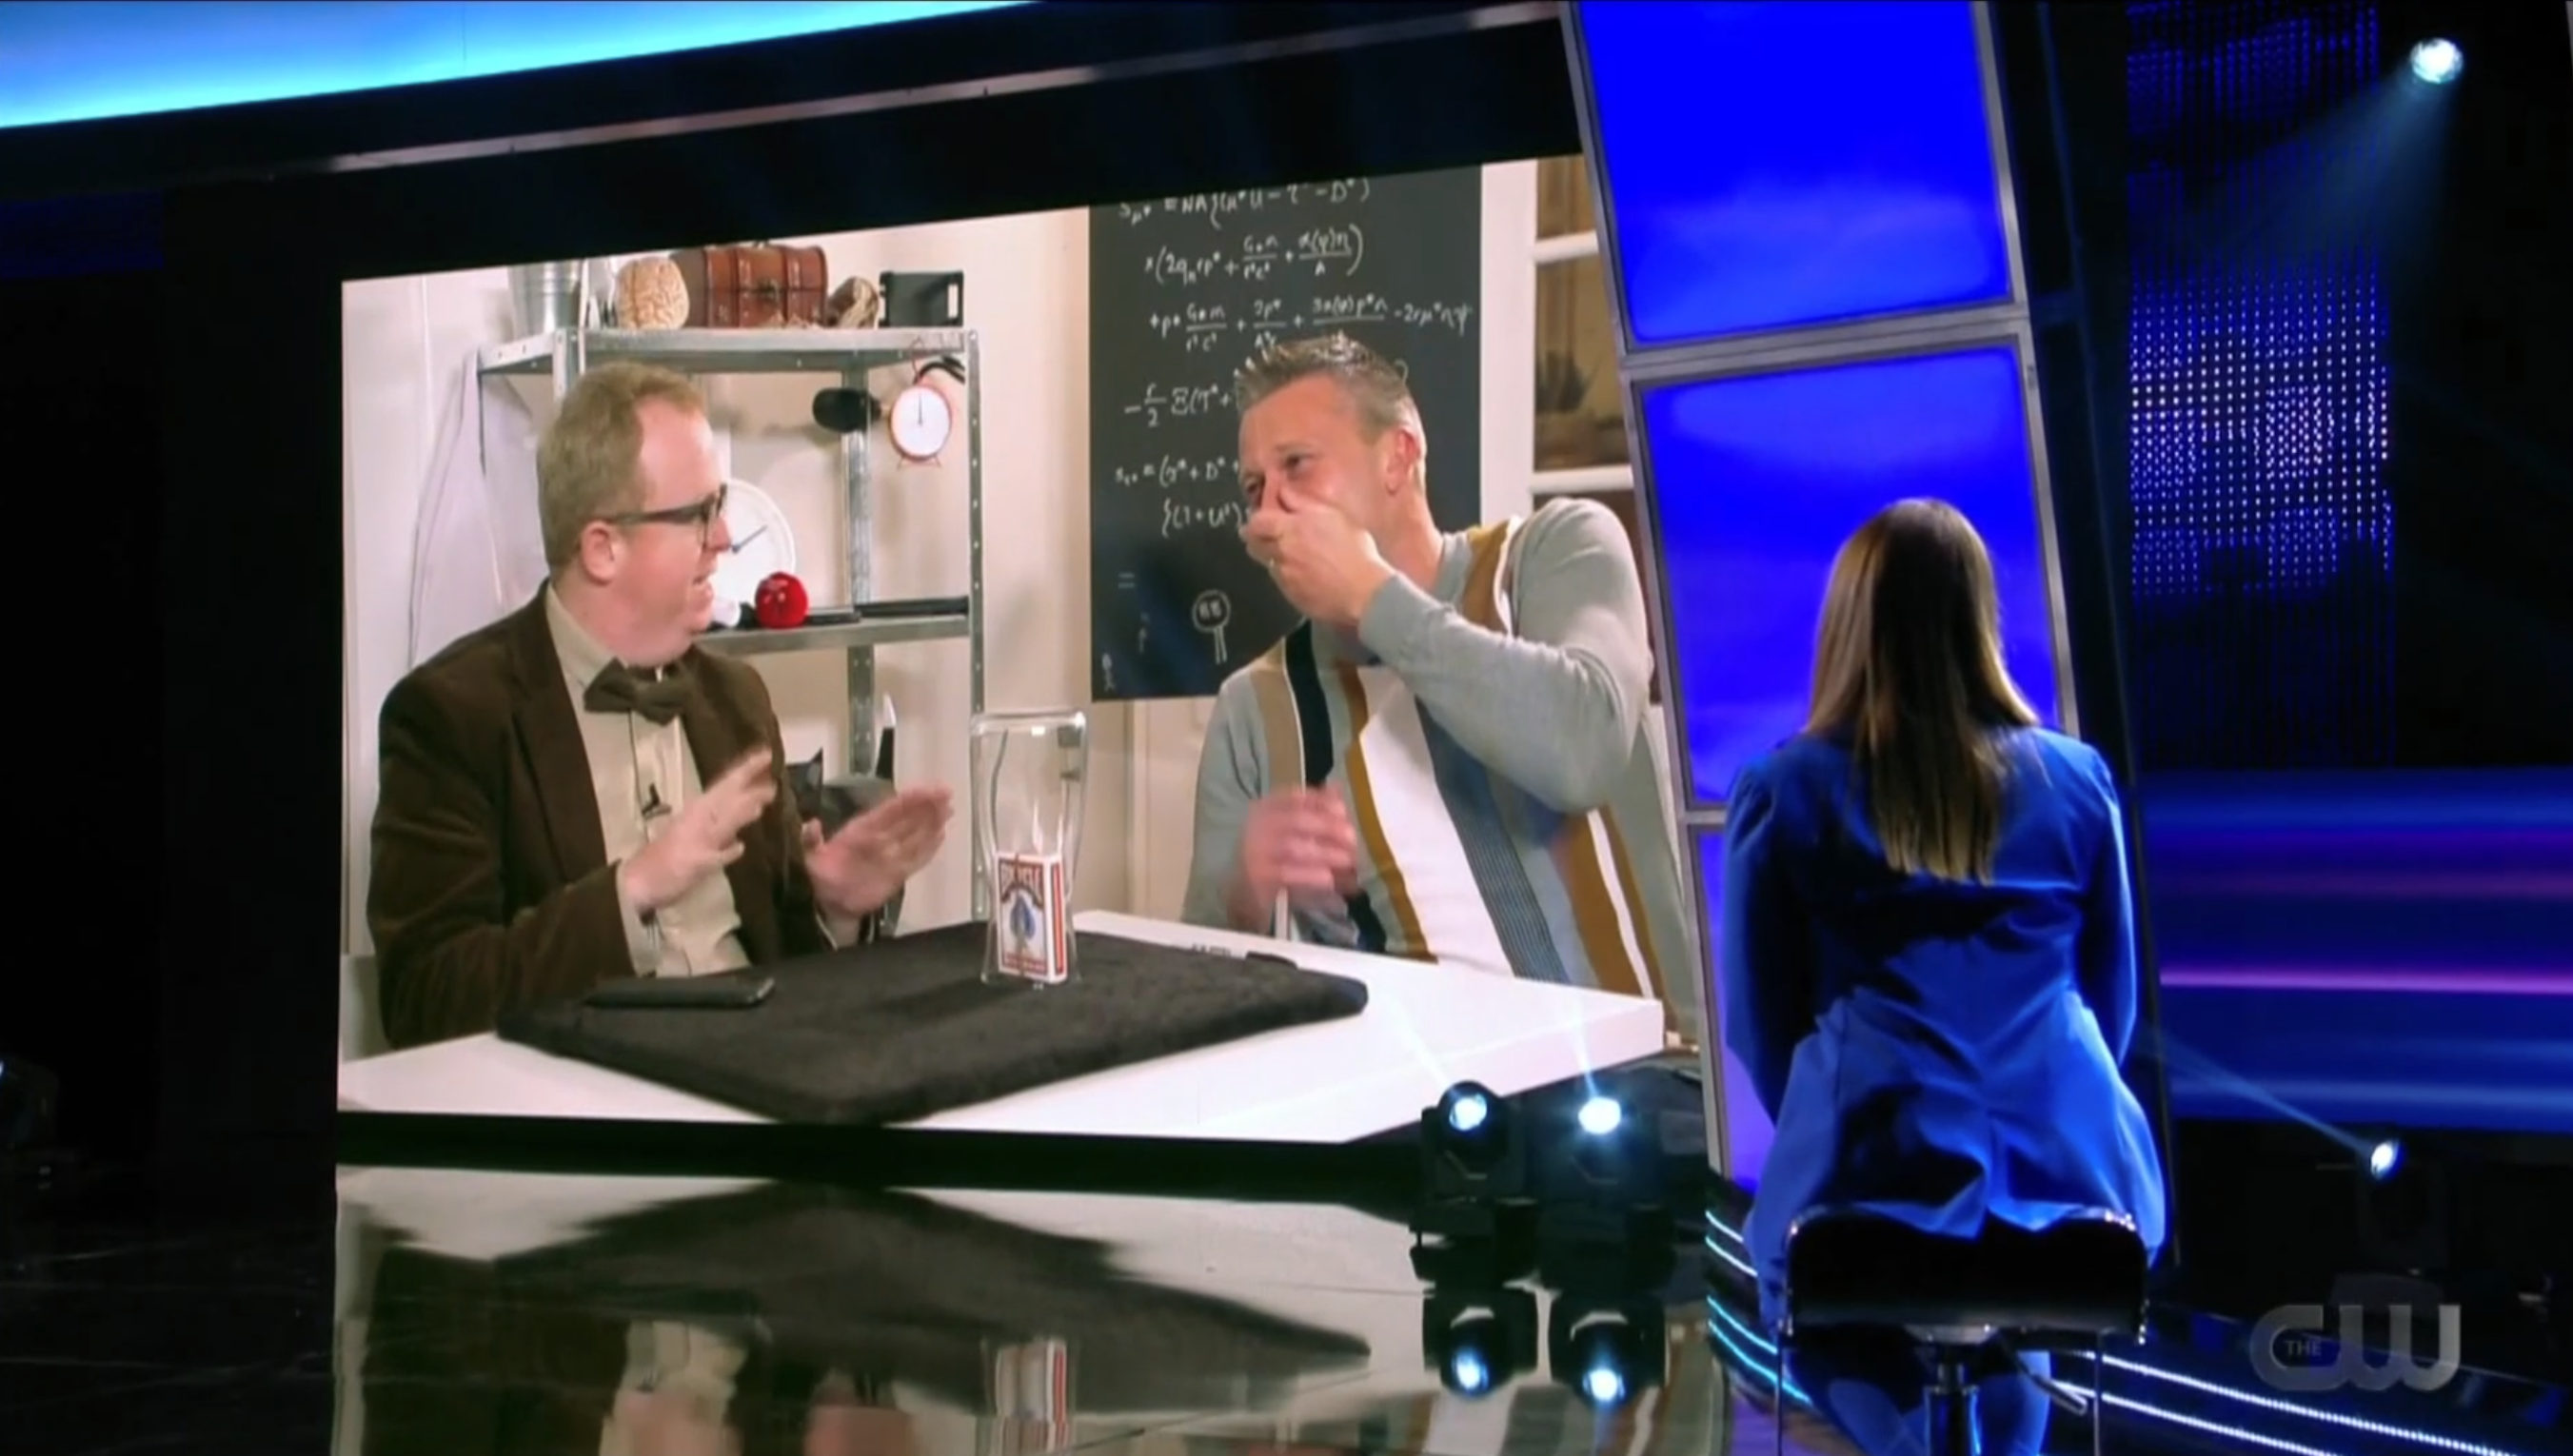 Gareth from Tech Support pretending to be iPad Magician Noel Qualter on TV show Penn & Teller Fool Us